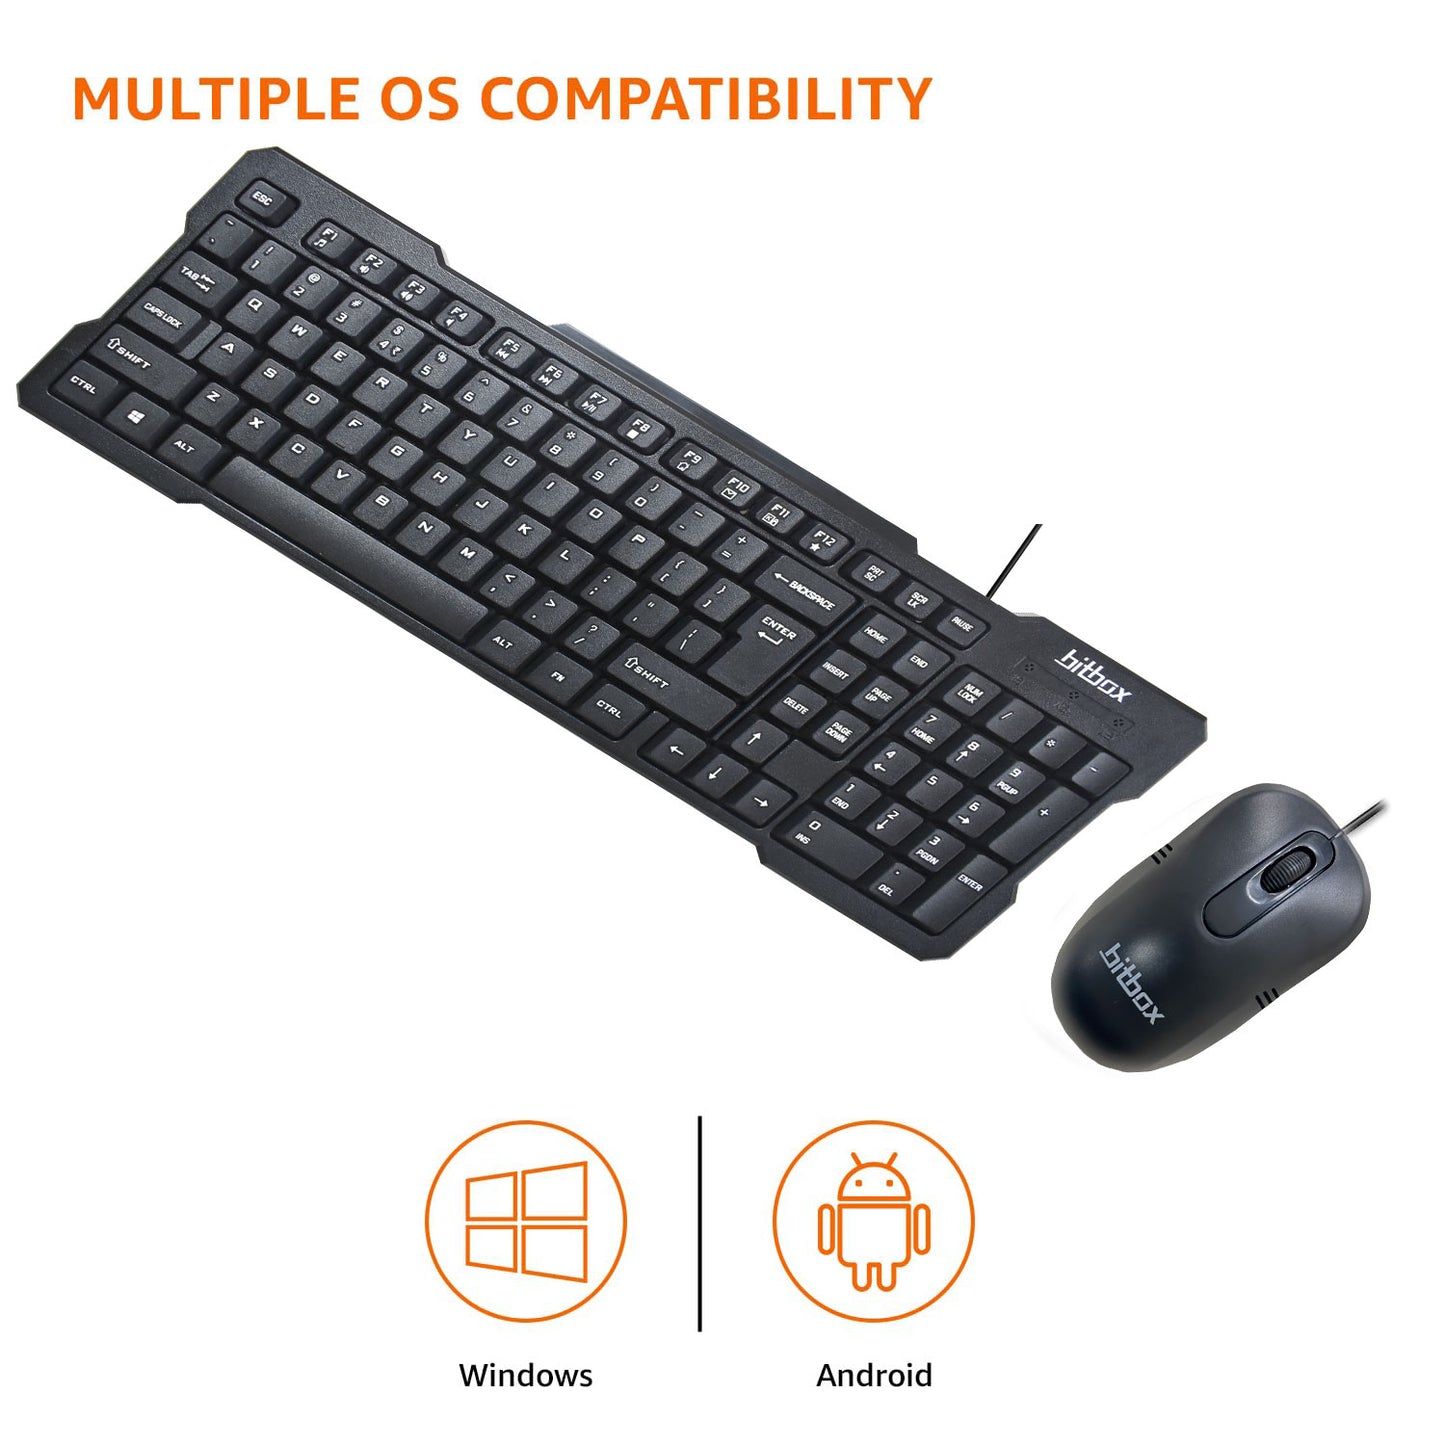 Bit-io by BitBox BBKM02 Wired Keyboard and Mouse Combo with Instant USB Plug-and-Play Setup, 12 Shortcut Keys, 6° Adjustable Slope Keyboard and 1600 DPI Optical Sensor Mouse